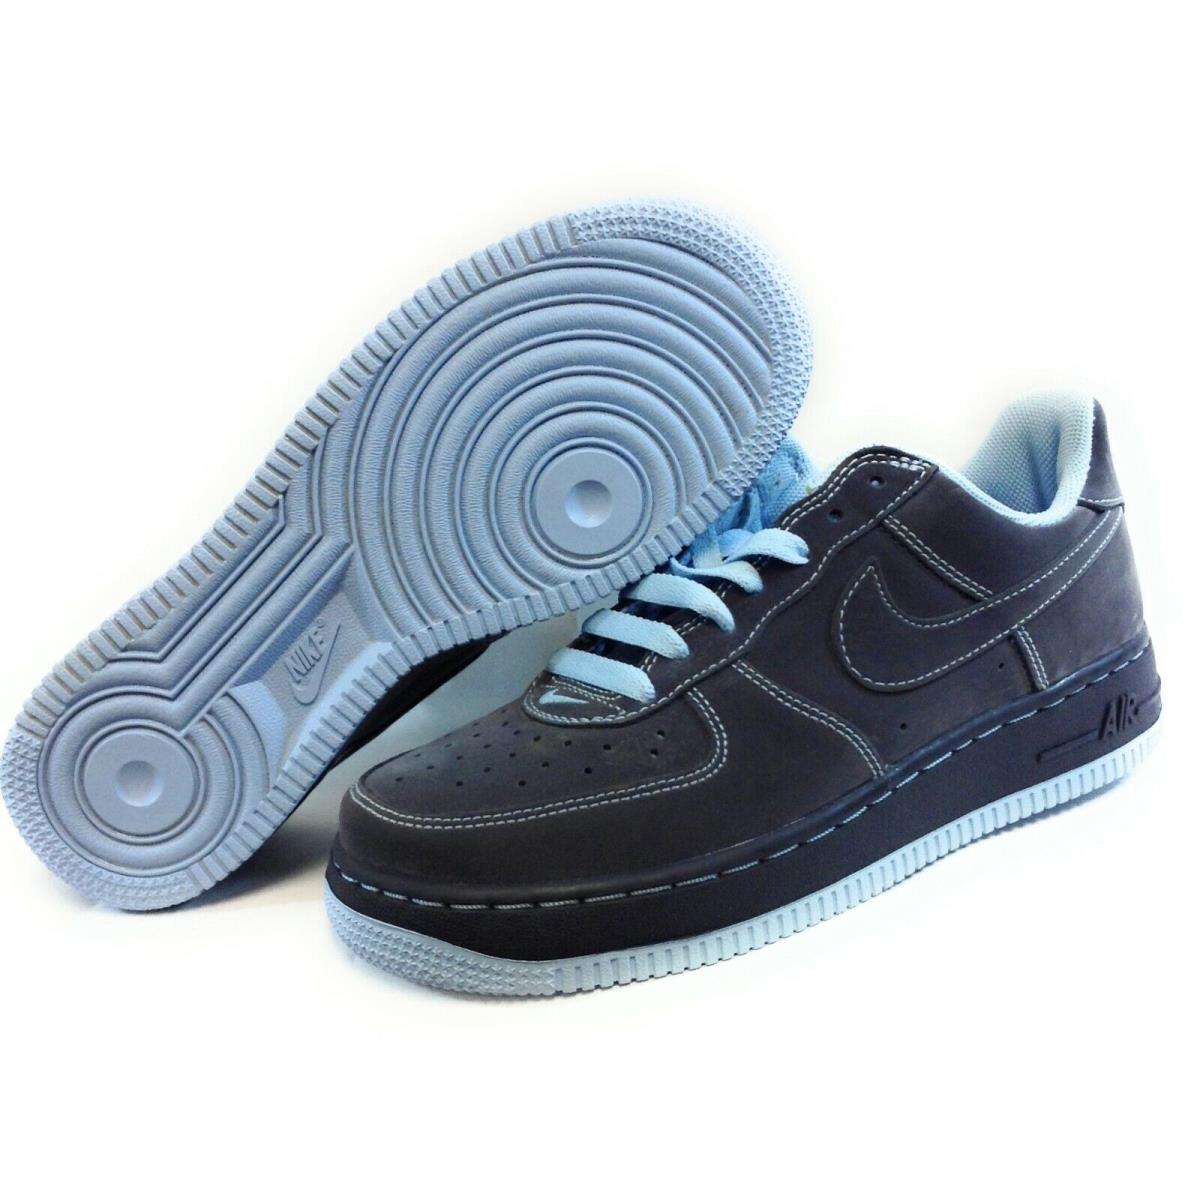 Boys Kids Youth Nike Air Force 1 Grey Blue 309585 001 2005 DS Sneakers Shoes - Grey